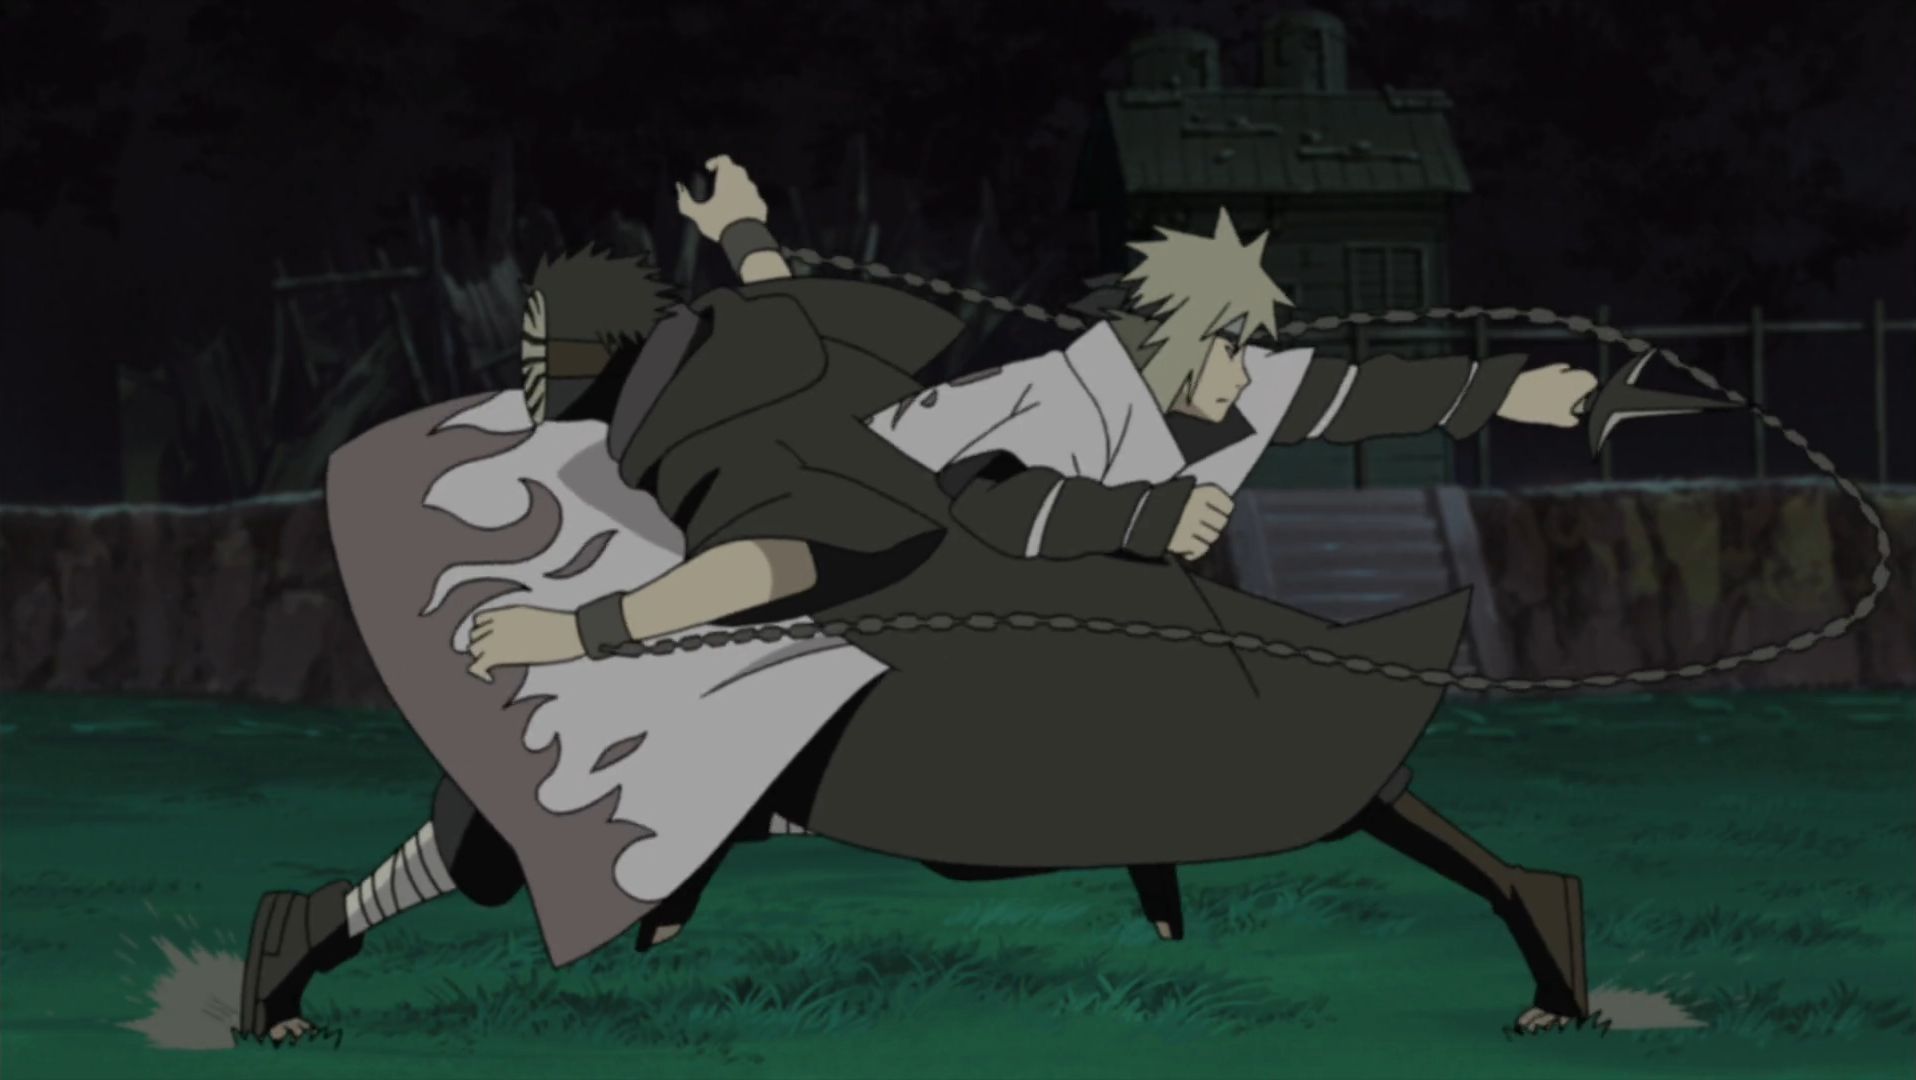 http://images4.wikia.nocookie.net/__cb20120901061044/naruto/images/8/8f/Tobi_Chains.png